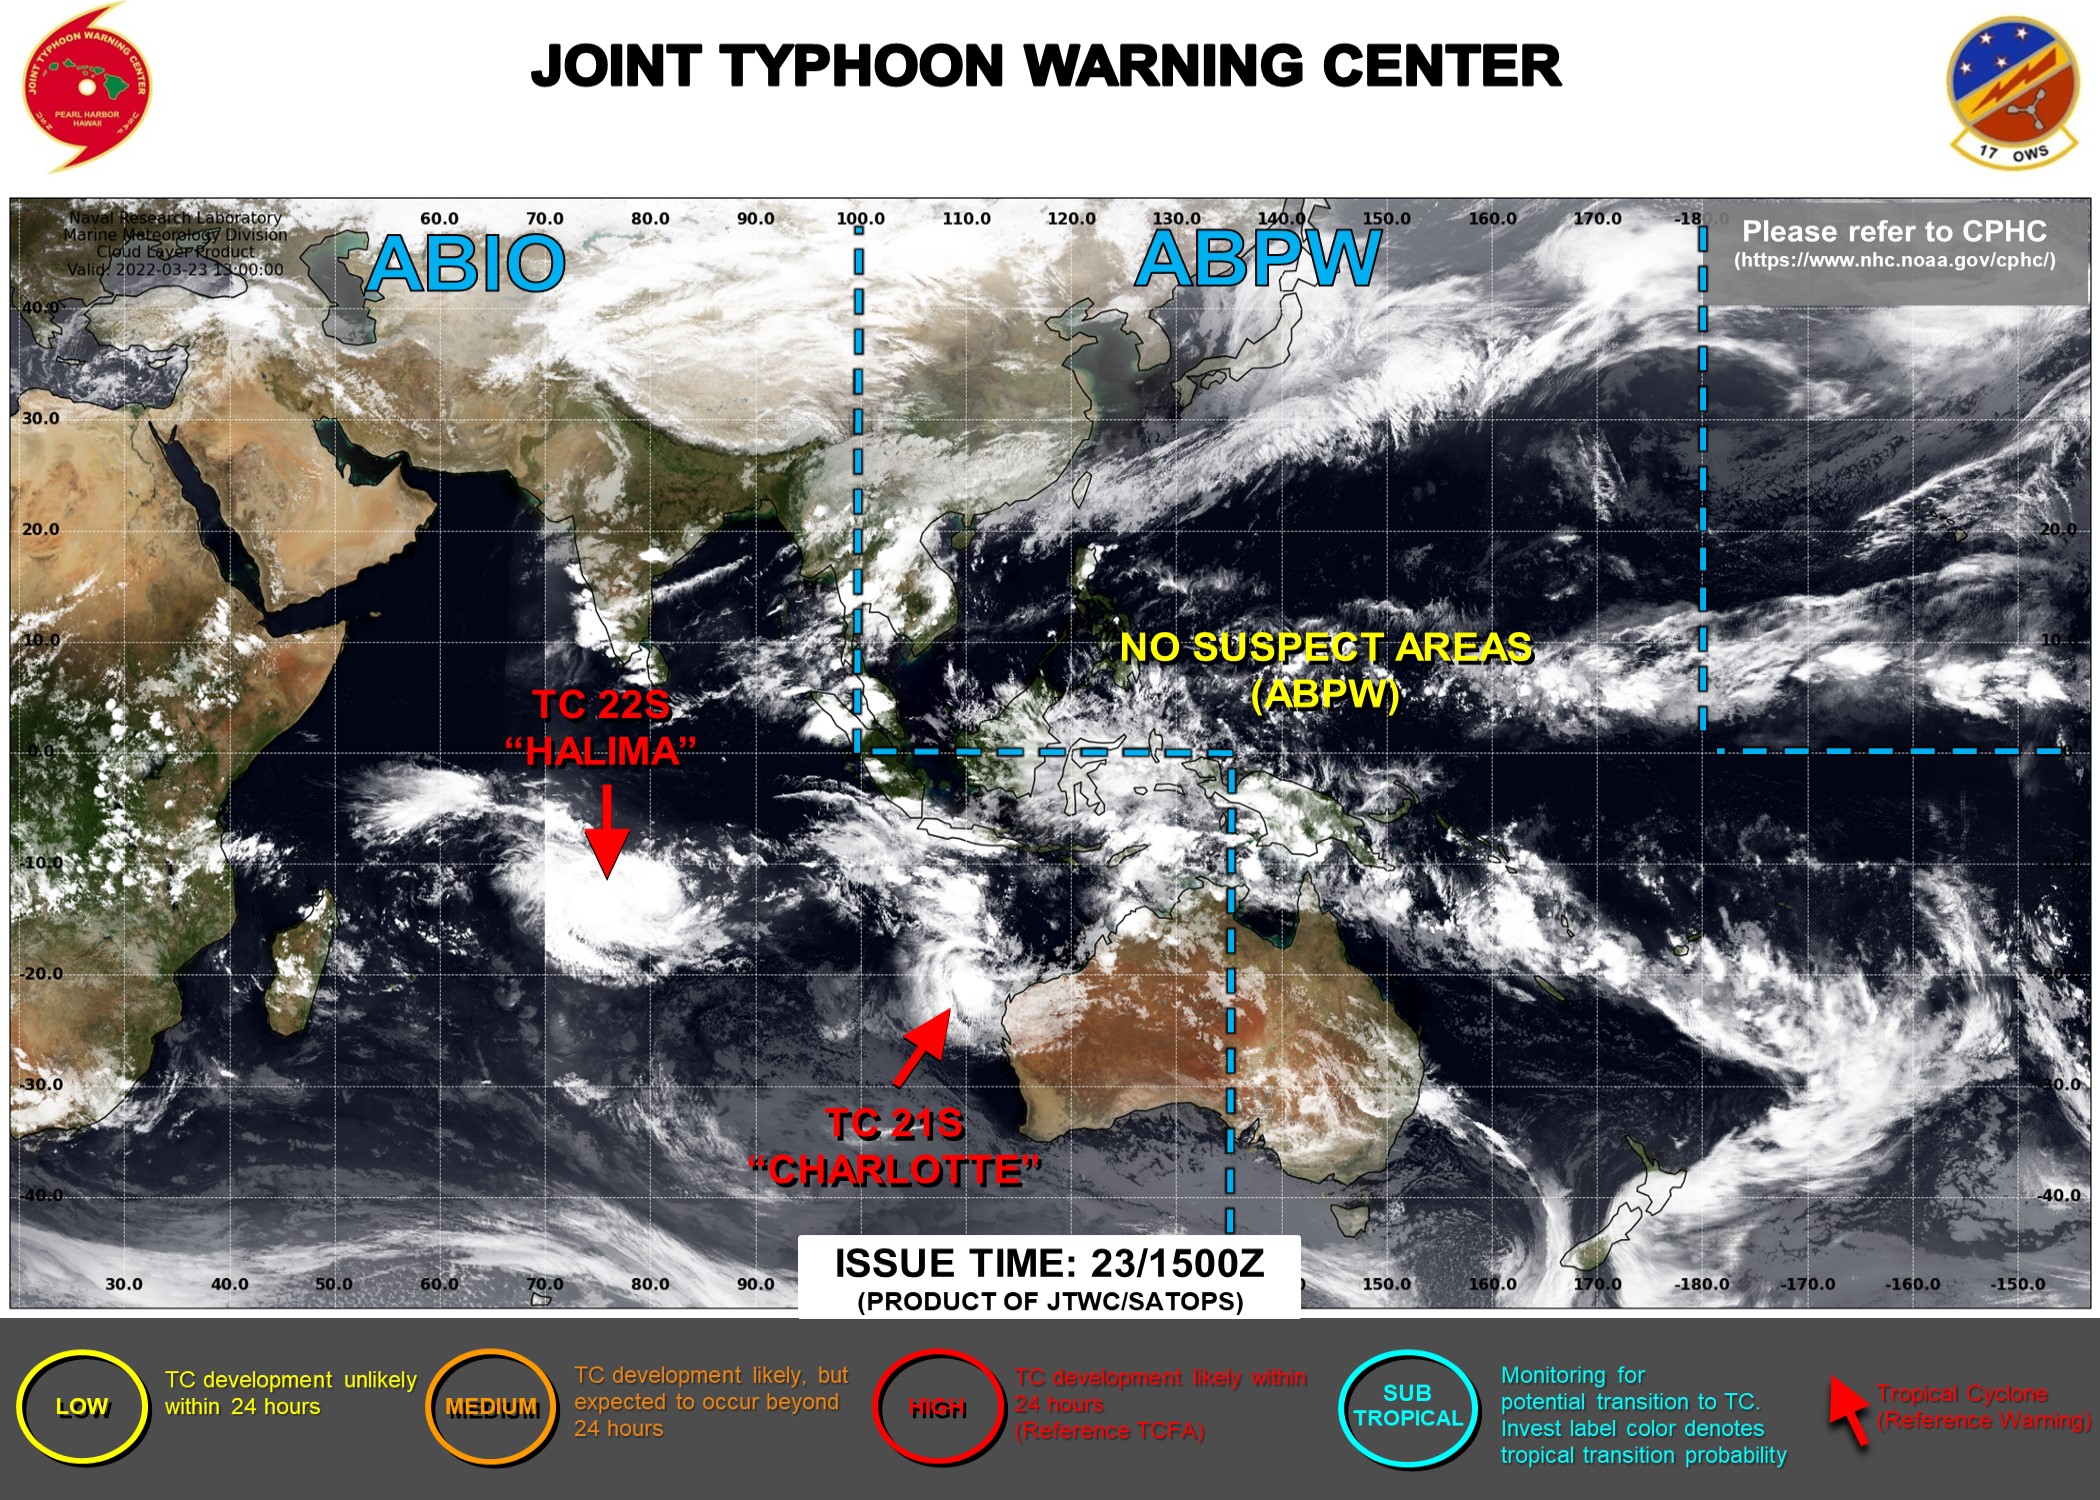 JTWC IS ISSUING 6HOURLY WARNINGS ON TC 21S(CHARLOTTE) AND 12HOURLY WARNINGS ON  TC 22S(HALIMA). 3HOURLY SATELLITE BULLETINS ARE ISSUED FOR BOTH SYSTEMS. THEY WERE DISCONTINUED FOR INVEST 91B AT 23/0540UTC.